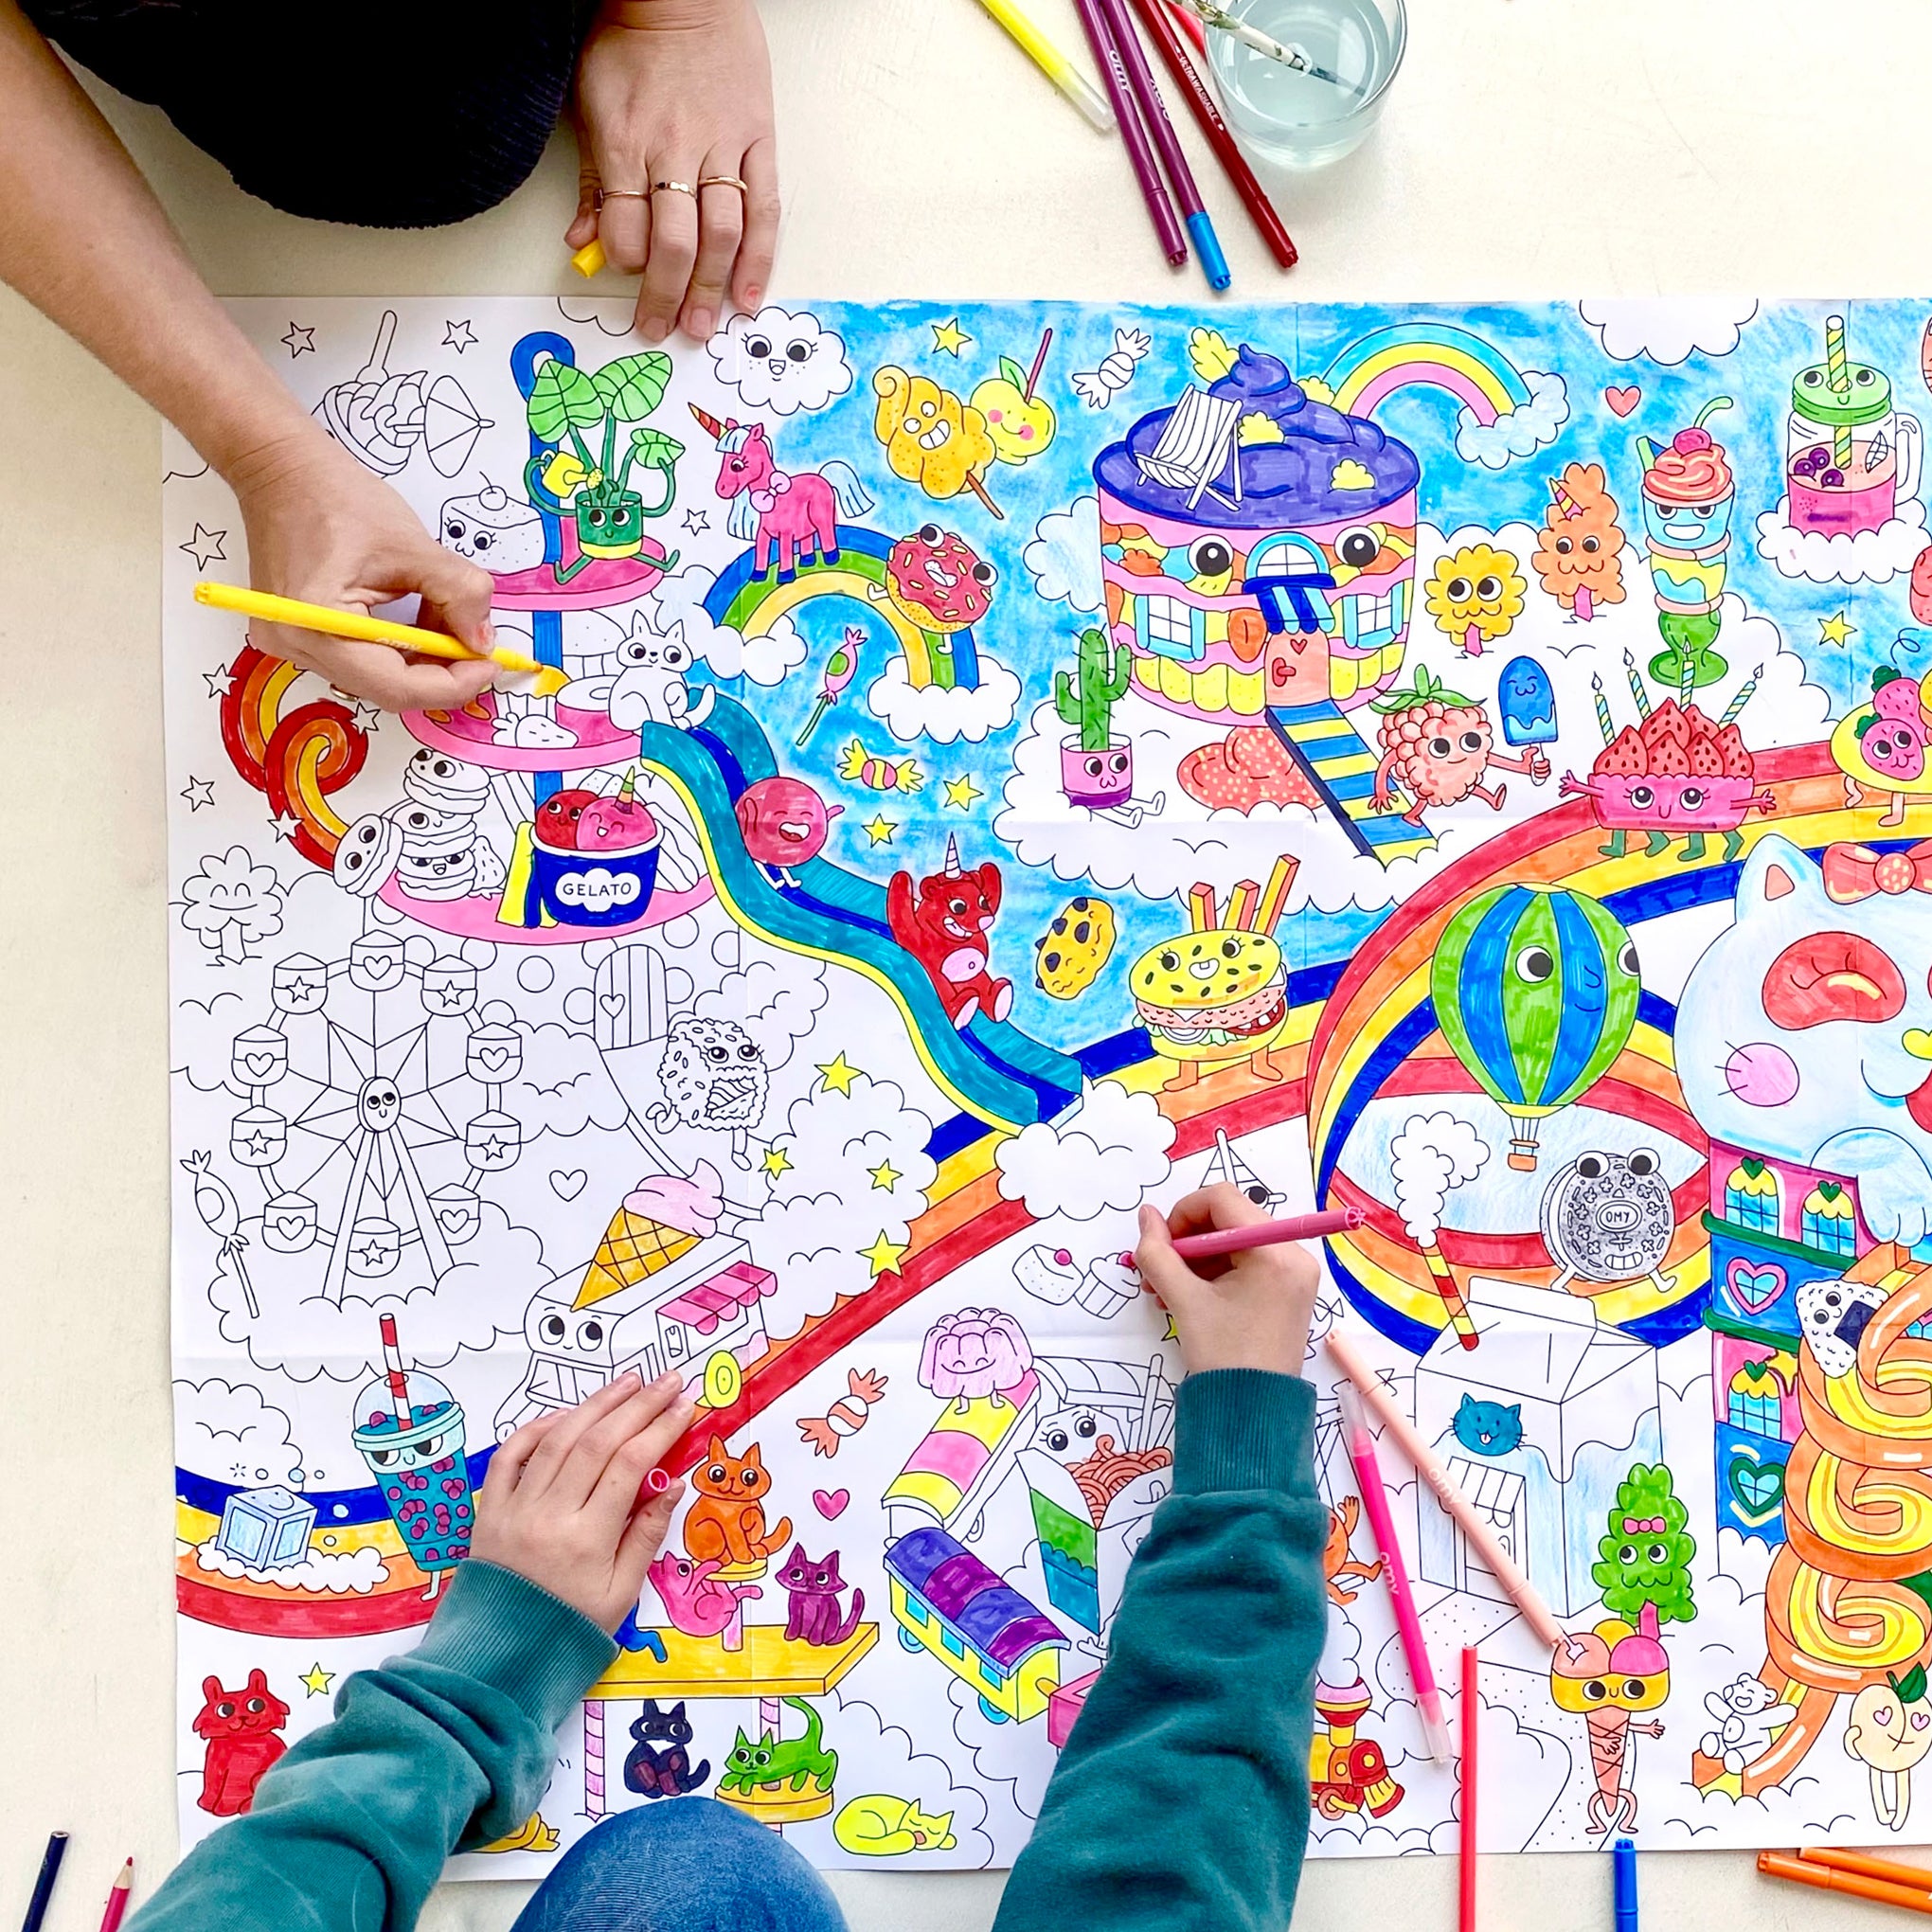 Giant Coloring Posters - NYC – MoMA Design Store